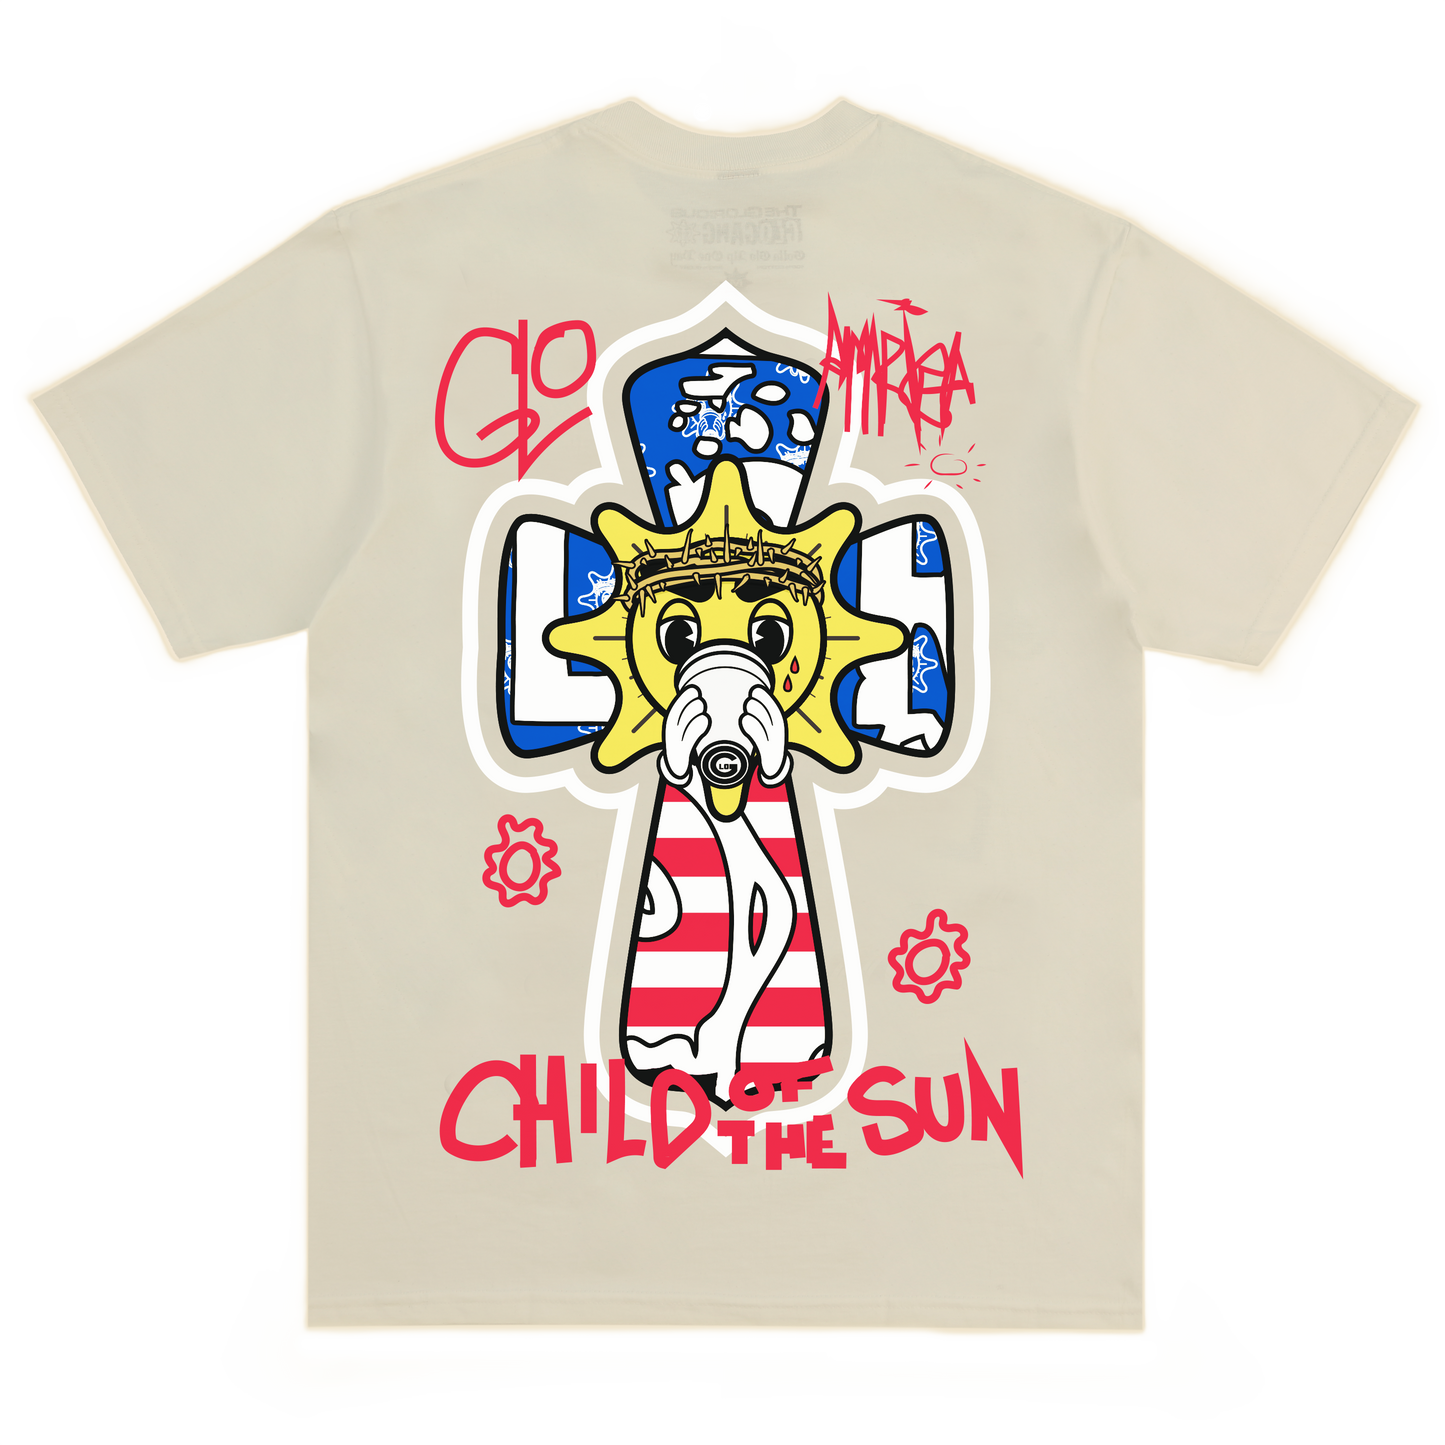 Glo Bless America Tee (Natural)